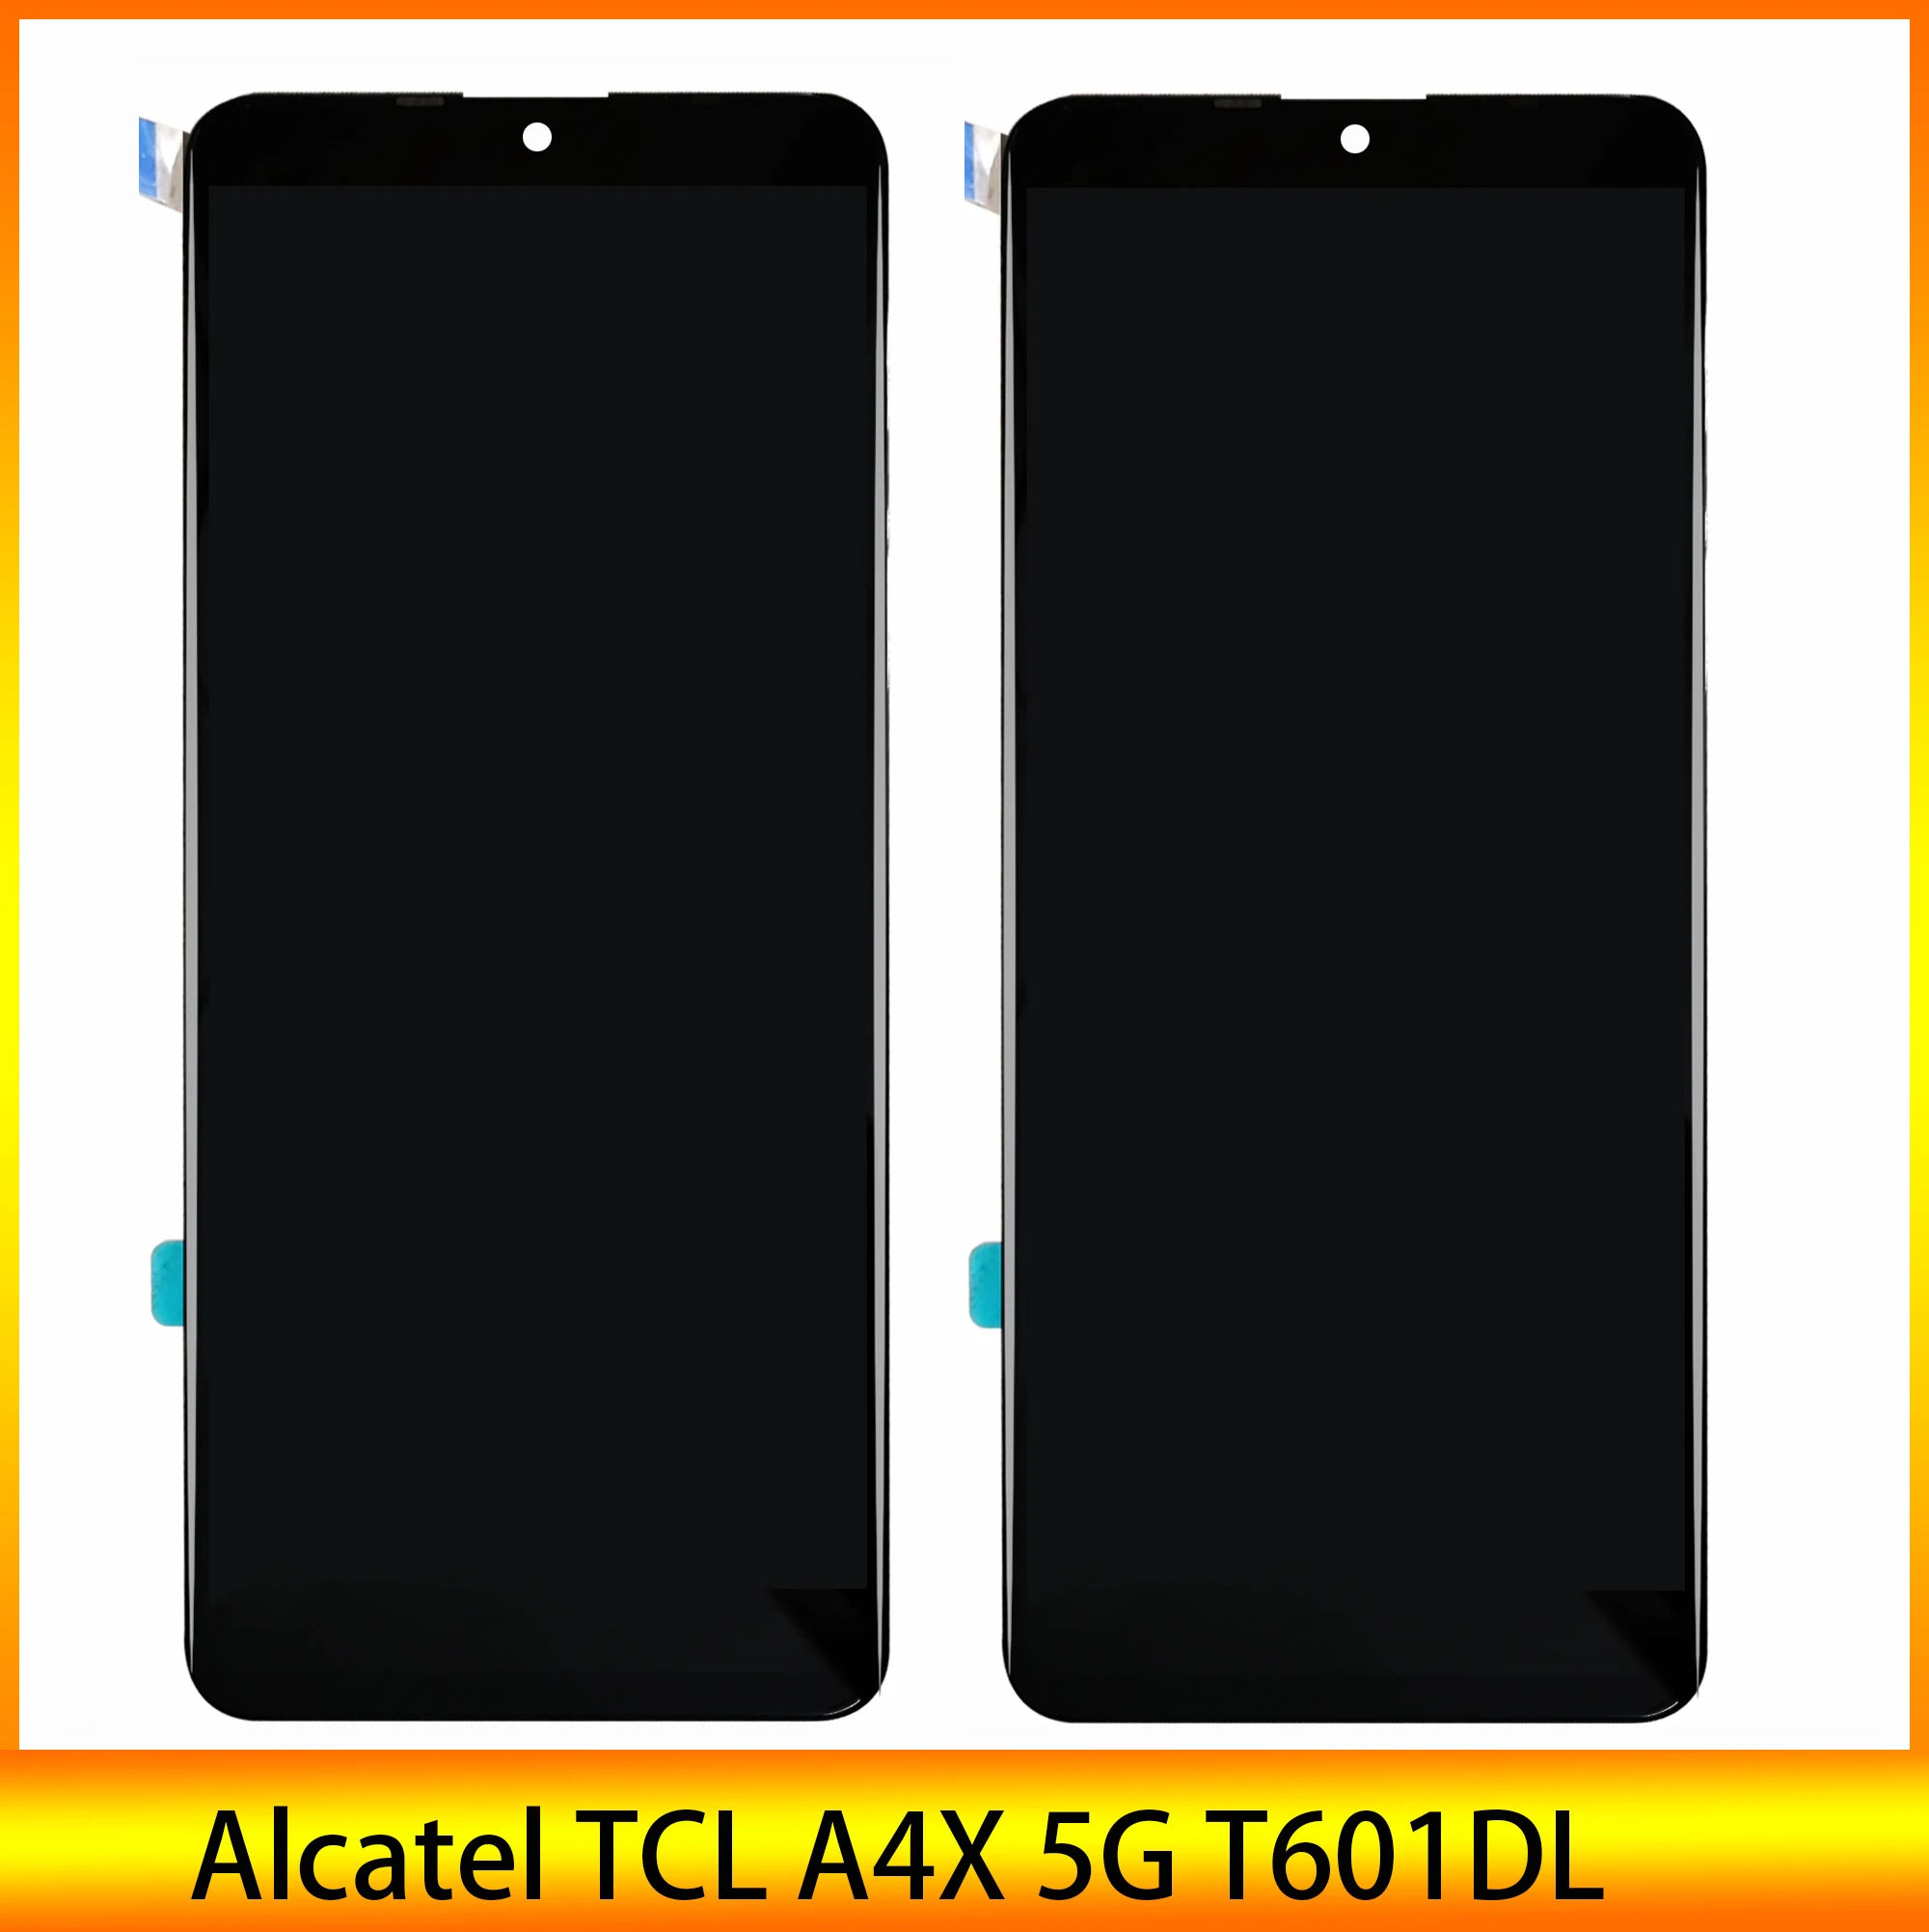 New LCD For Alcatel TCL A4X 5G T601DL LCD Display + Touch Screen Digiziter Assembly With Tools